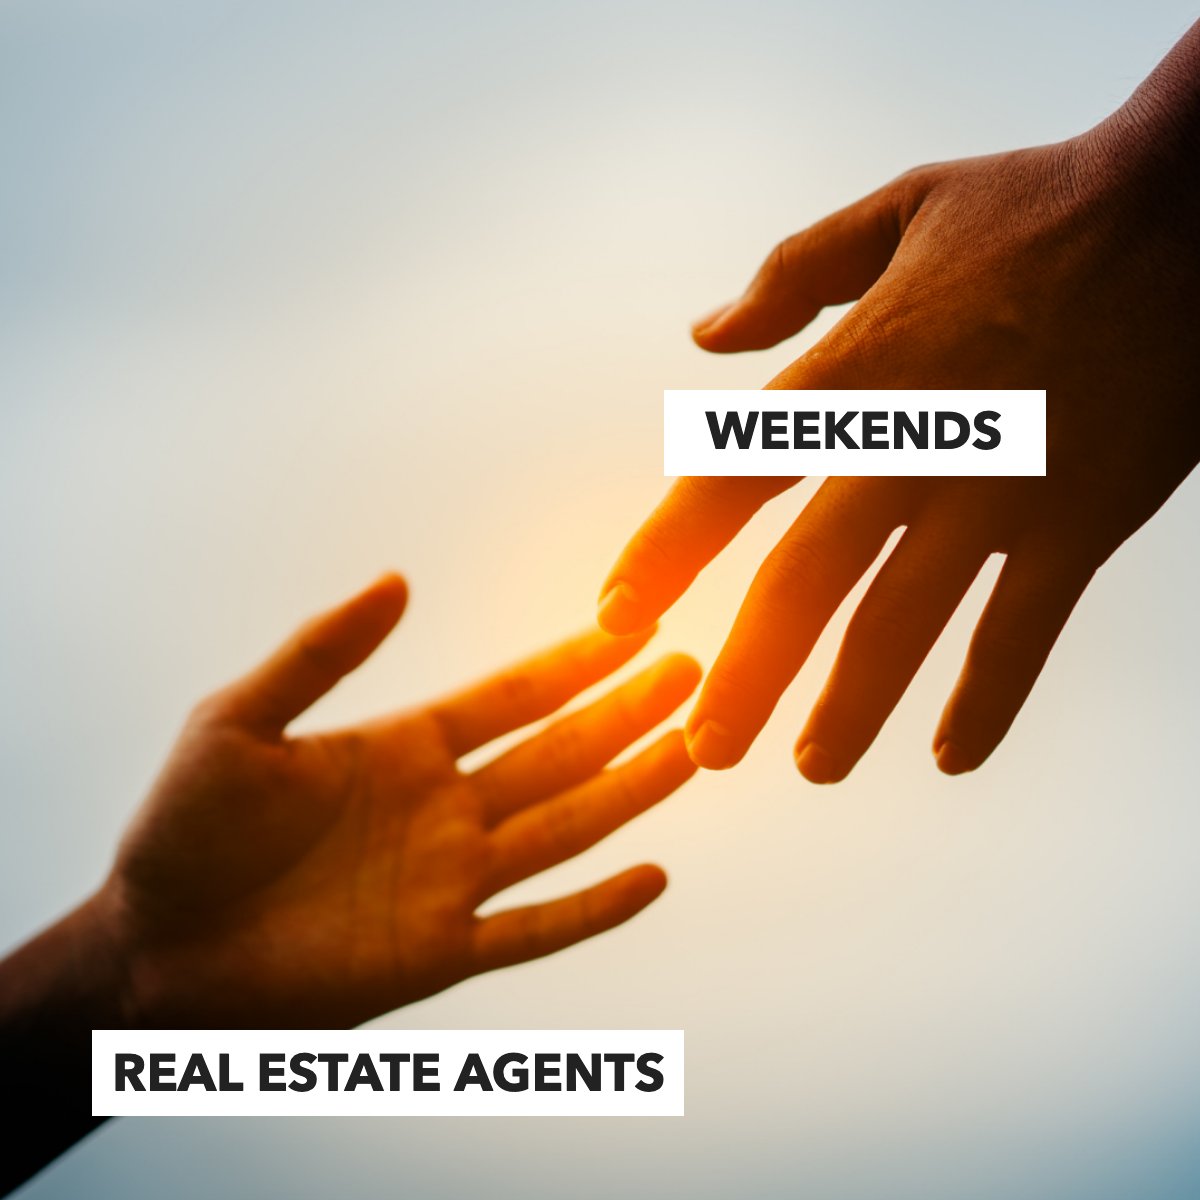 Real estate agents watching the weekend slip away like... 😑

#funny #weekends #agents #realestatememe #realestateagents #real estate